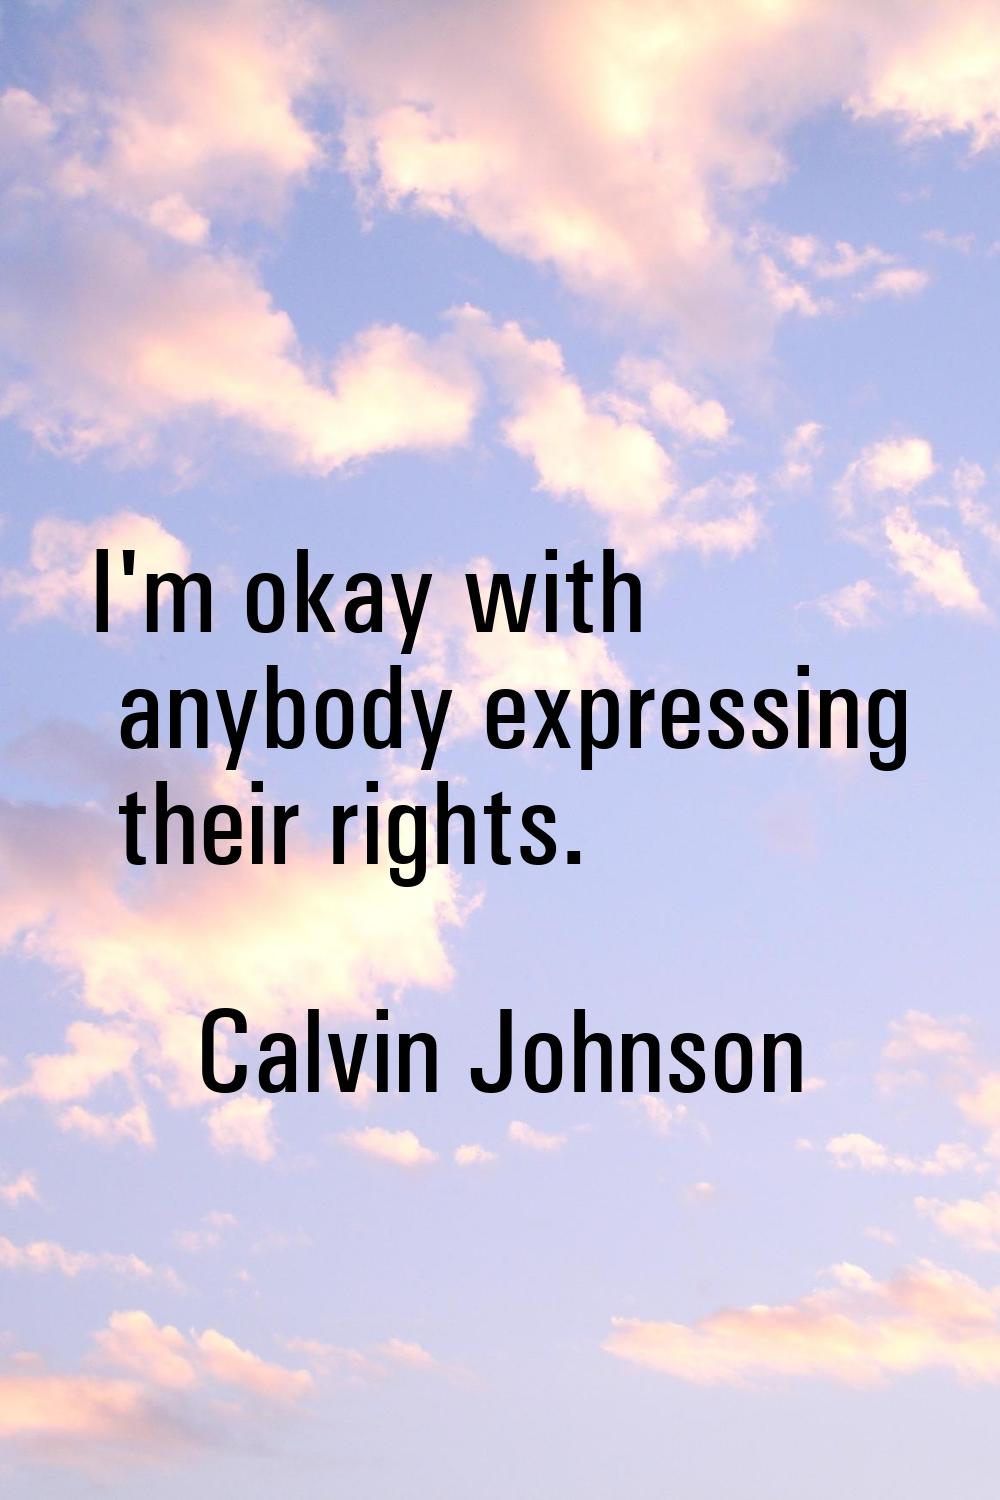 I'm okay with anybody expressing their rights.